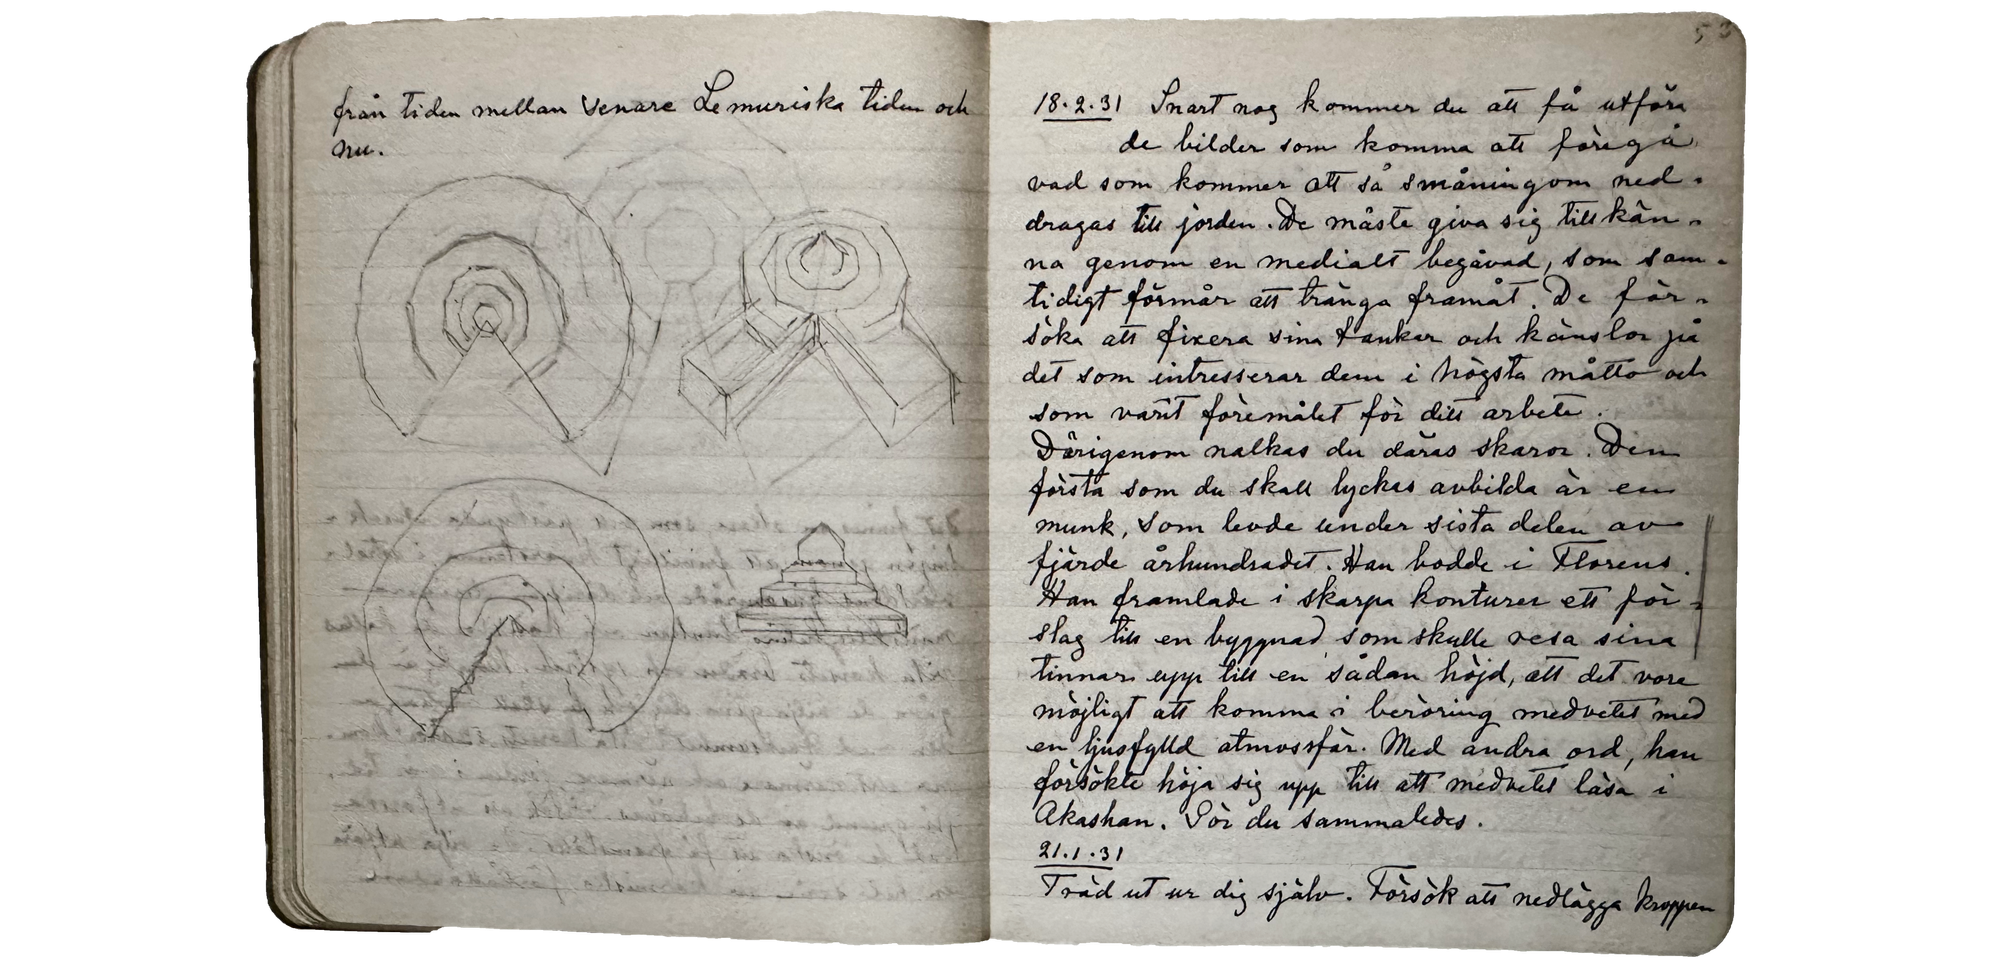 Image of notebook with temple sketches on left side